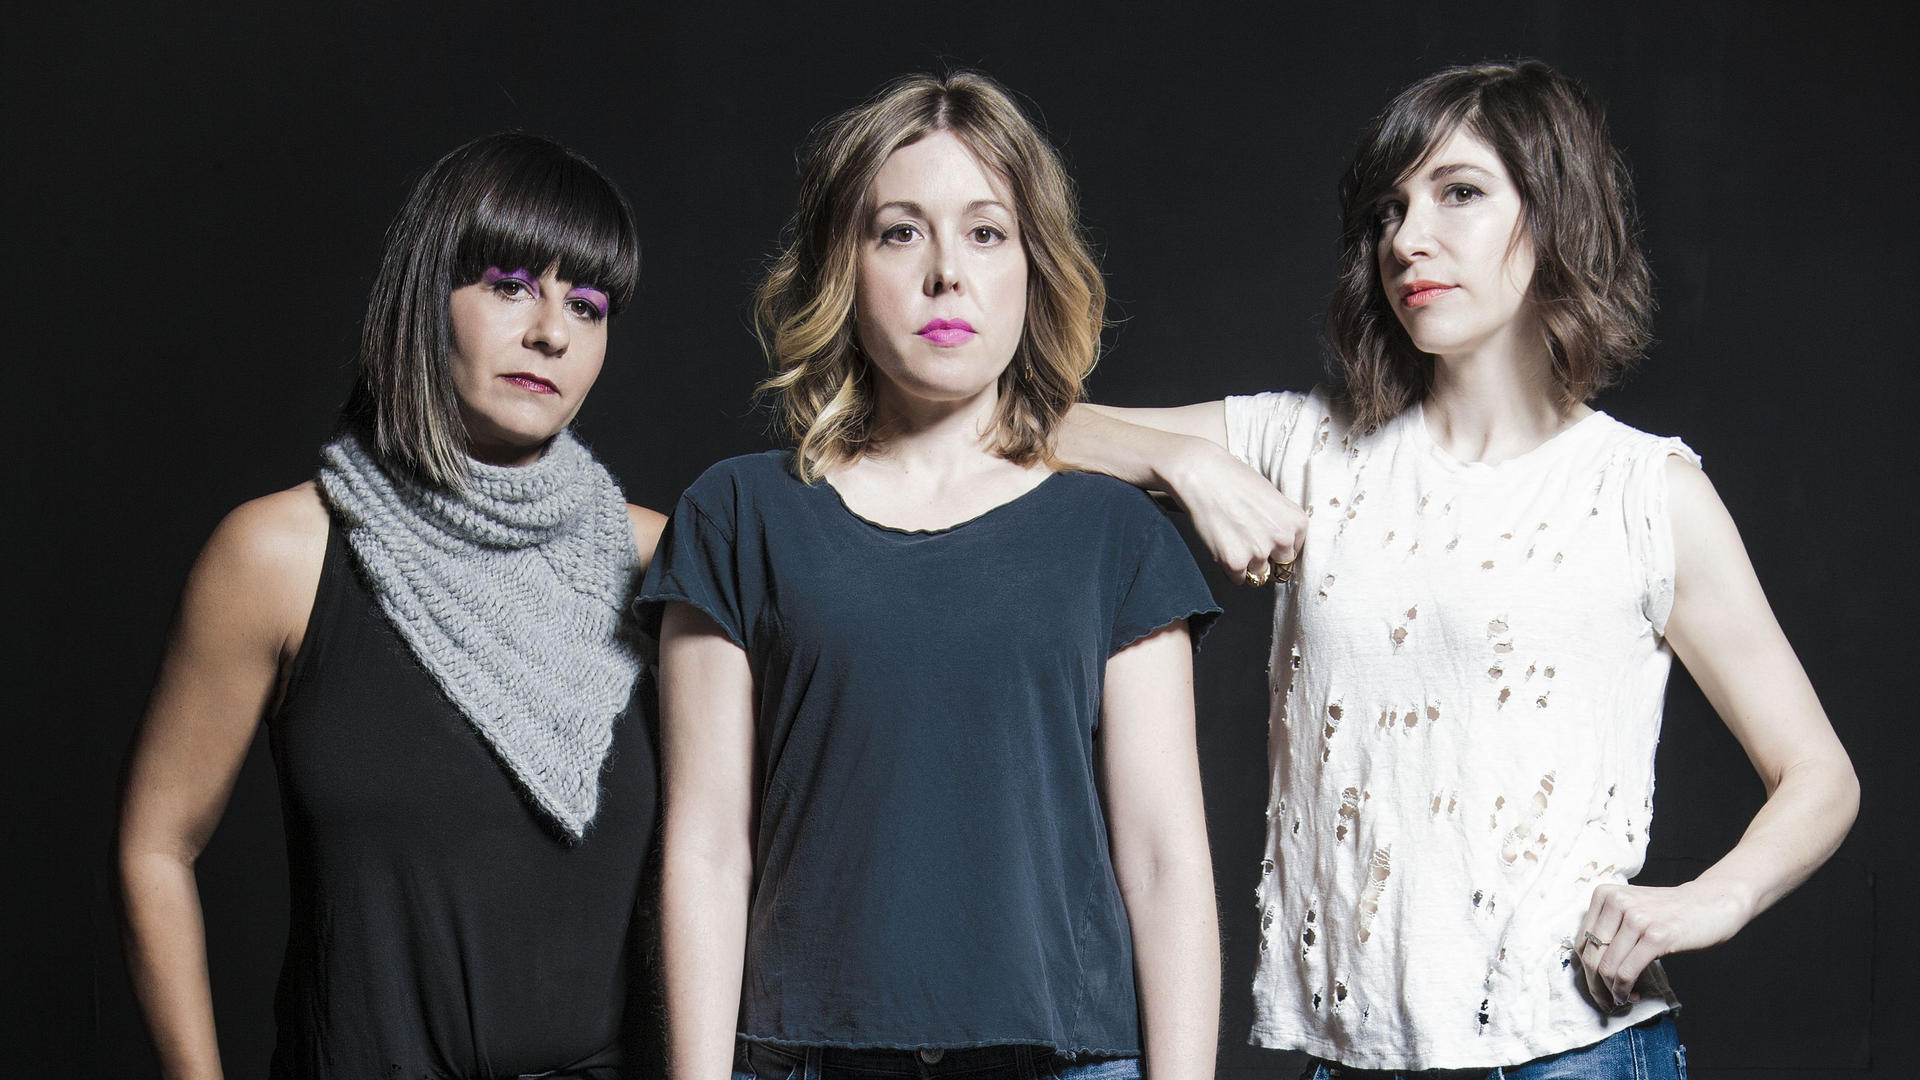 Sleater-Kinney are (from far left) Janet Weiss, Corin Tucker and Carrie Brownstein.